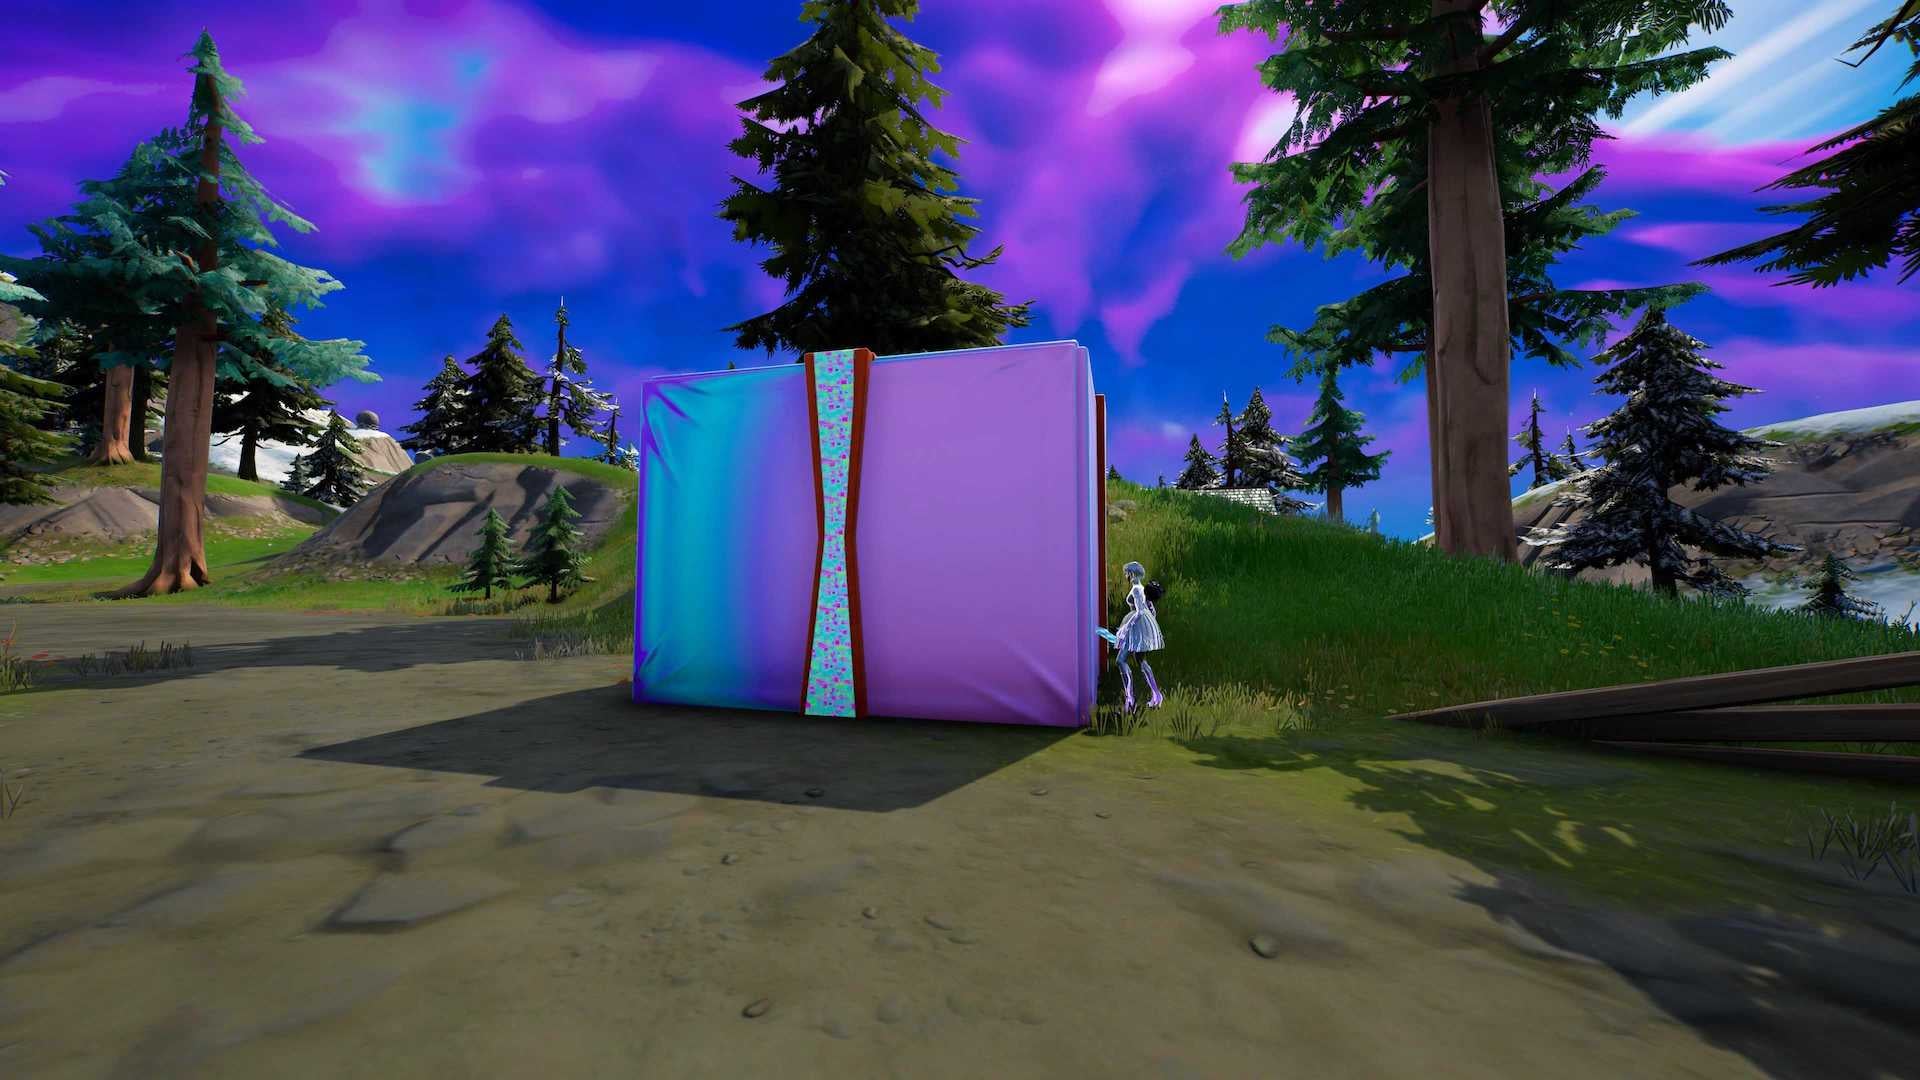 Image for Fortnite Birthday Present locations, and how to throw presents